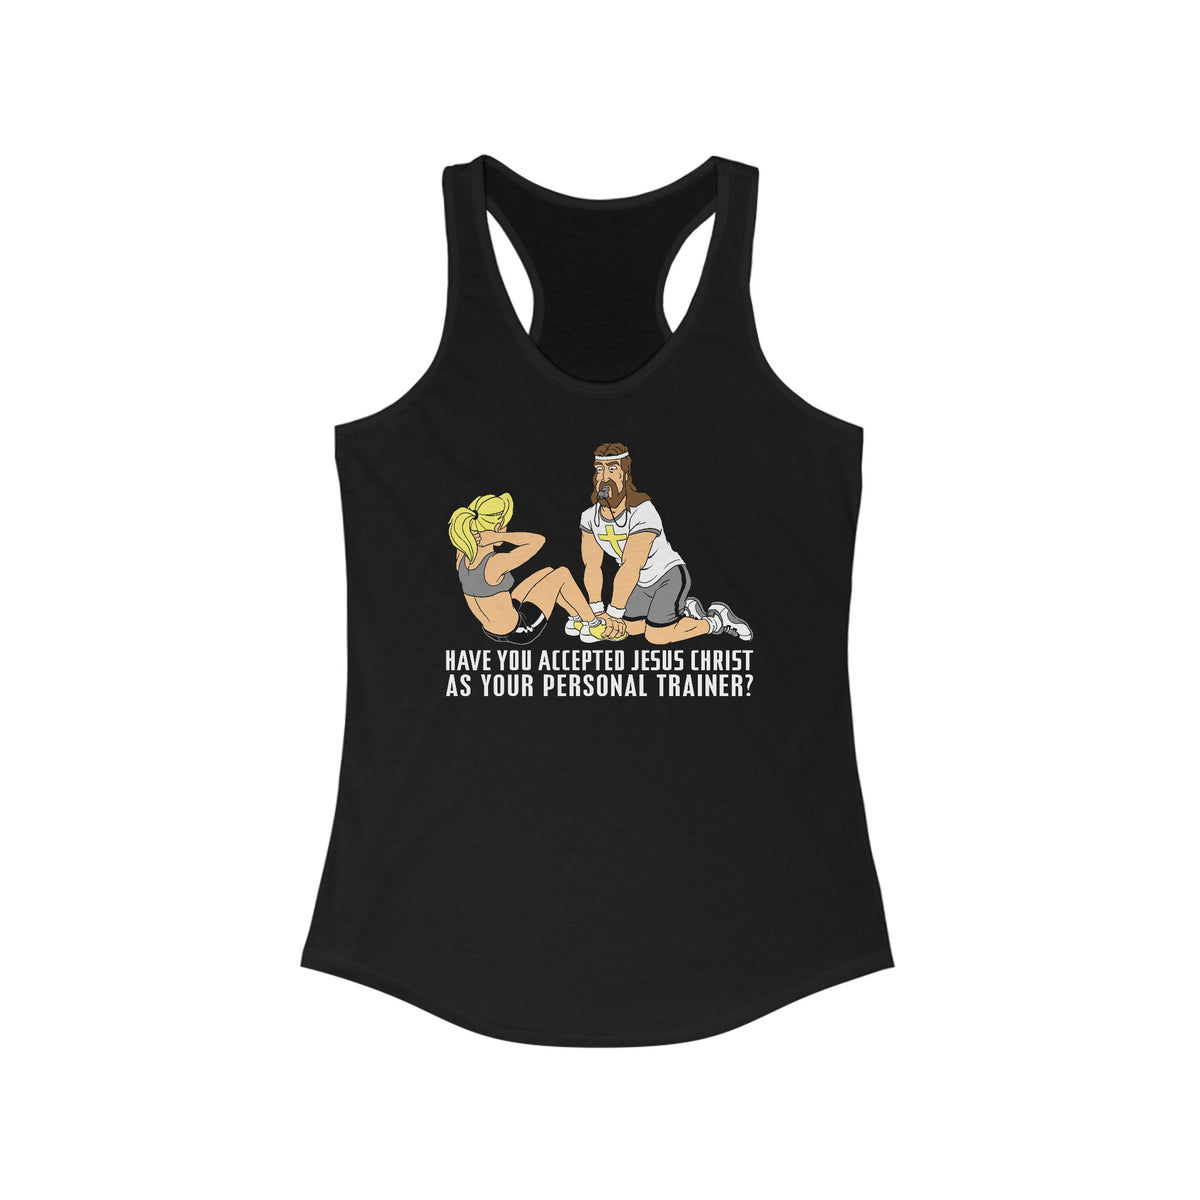 Have You Accepted Jesus Christ As Your Personal Trainer? -  Women’s Racerback Tank